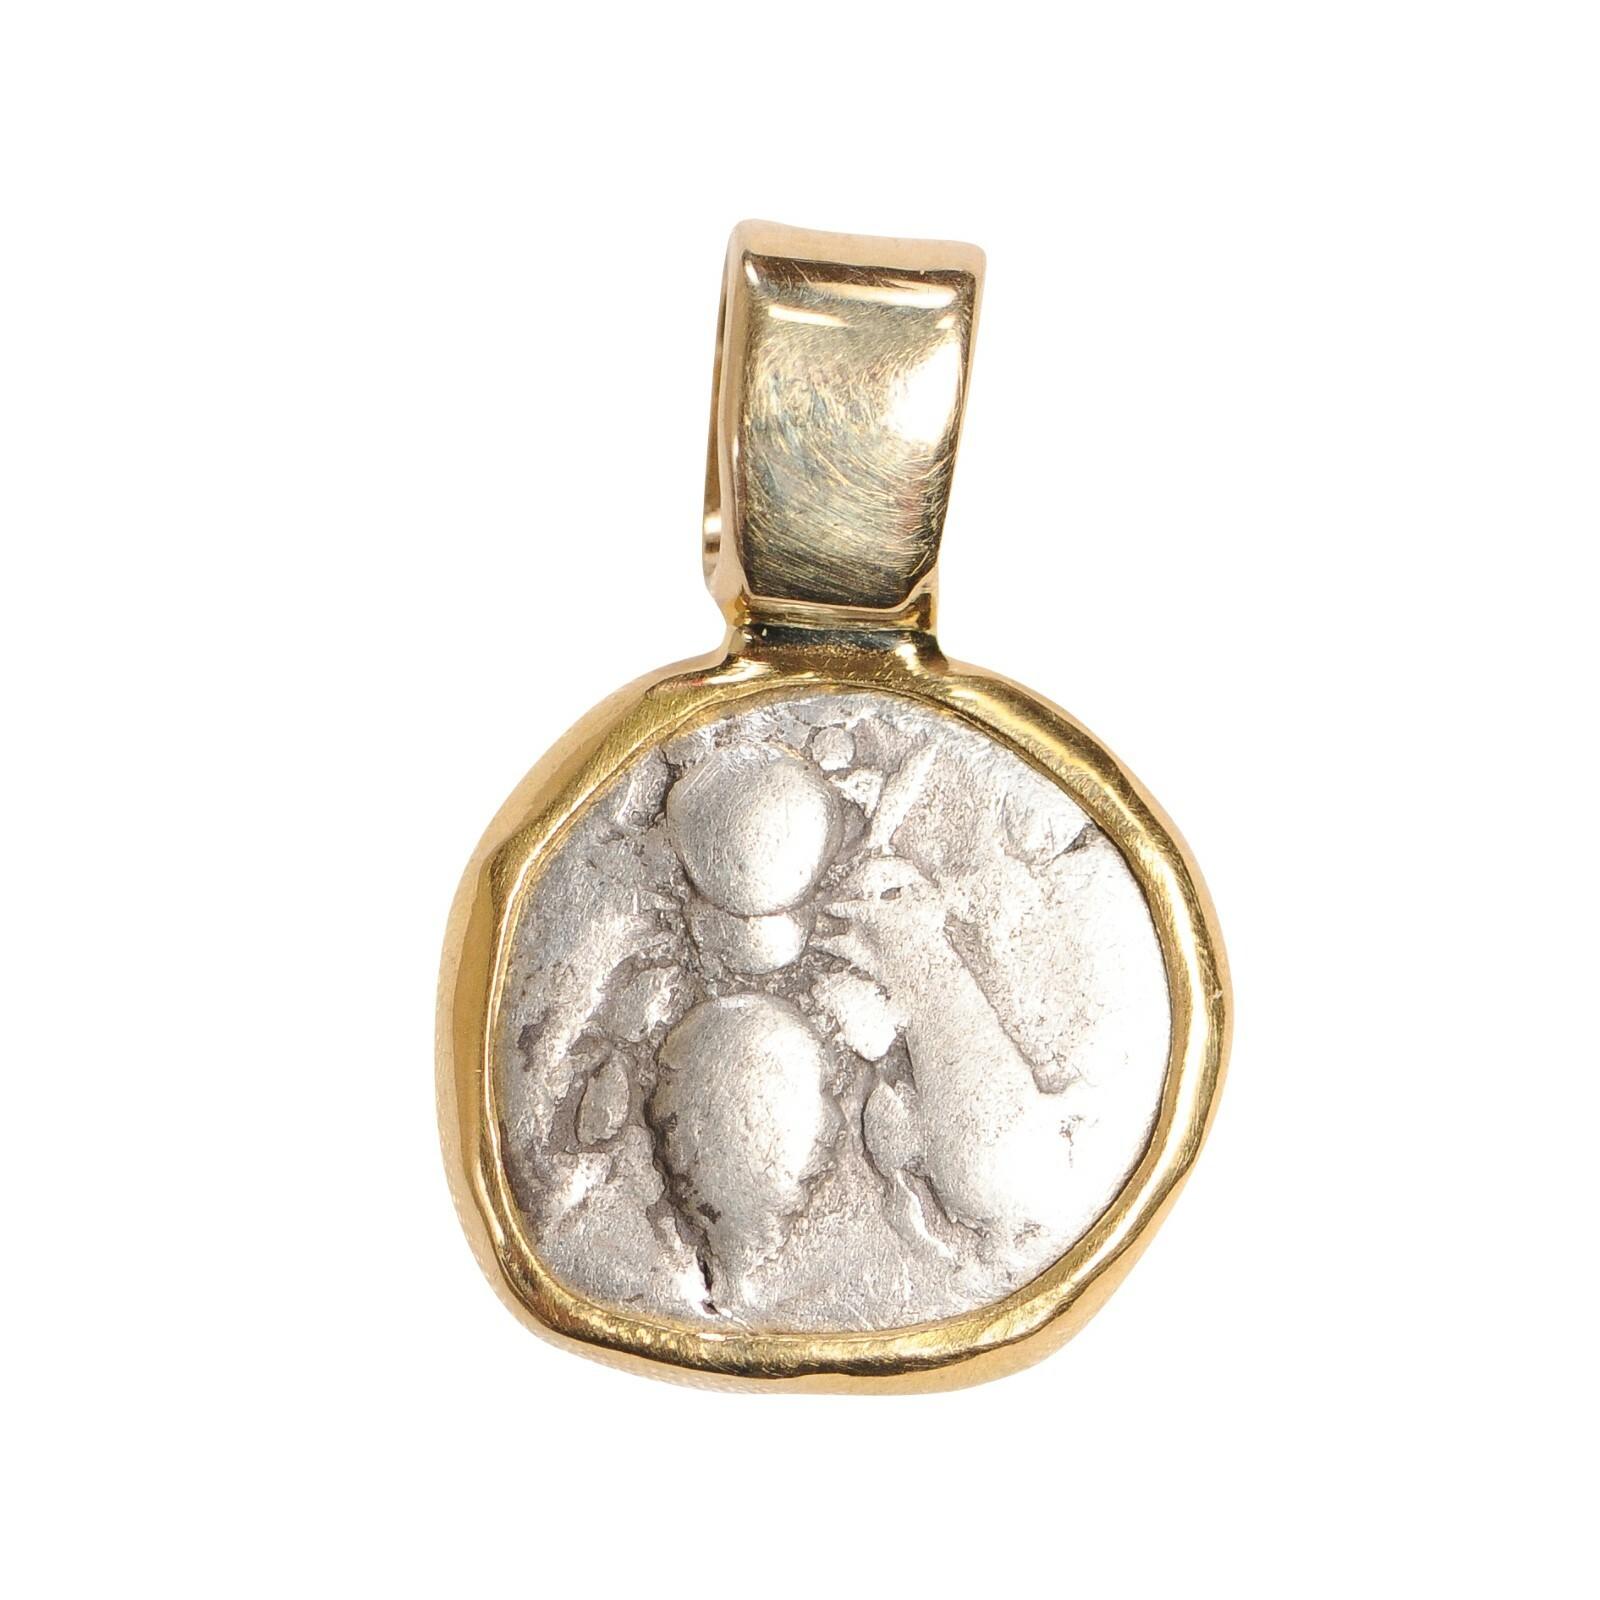 A bee coin pendant hand set in 18k gold. This dainty size pendant with a sweet image of a bee would be a wonderful adornment for a necklace or bracelet . This coin is from ancient Greece. Measurement is .5